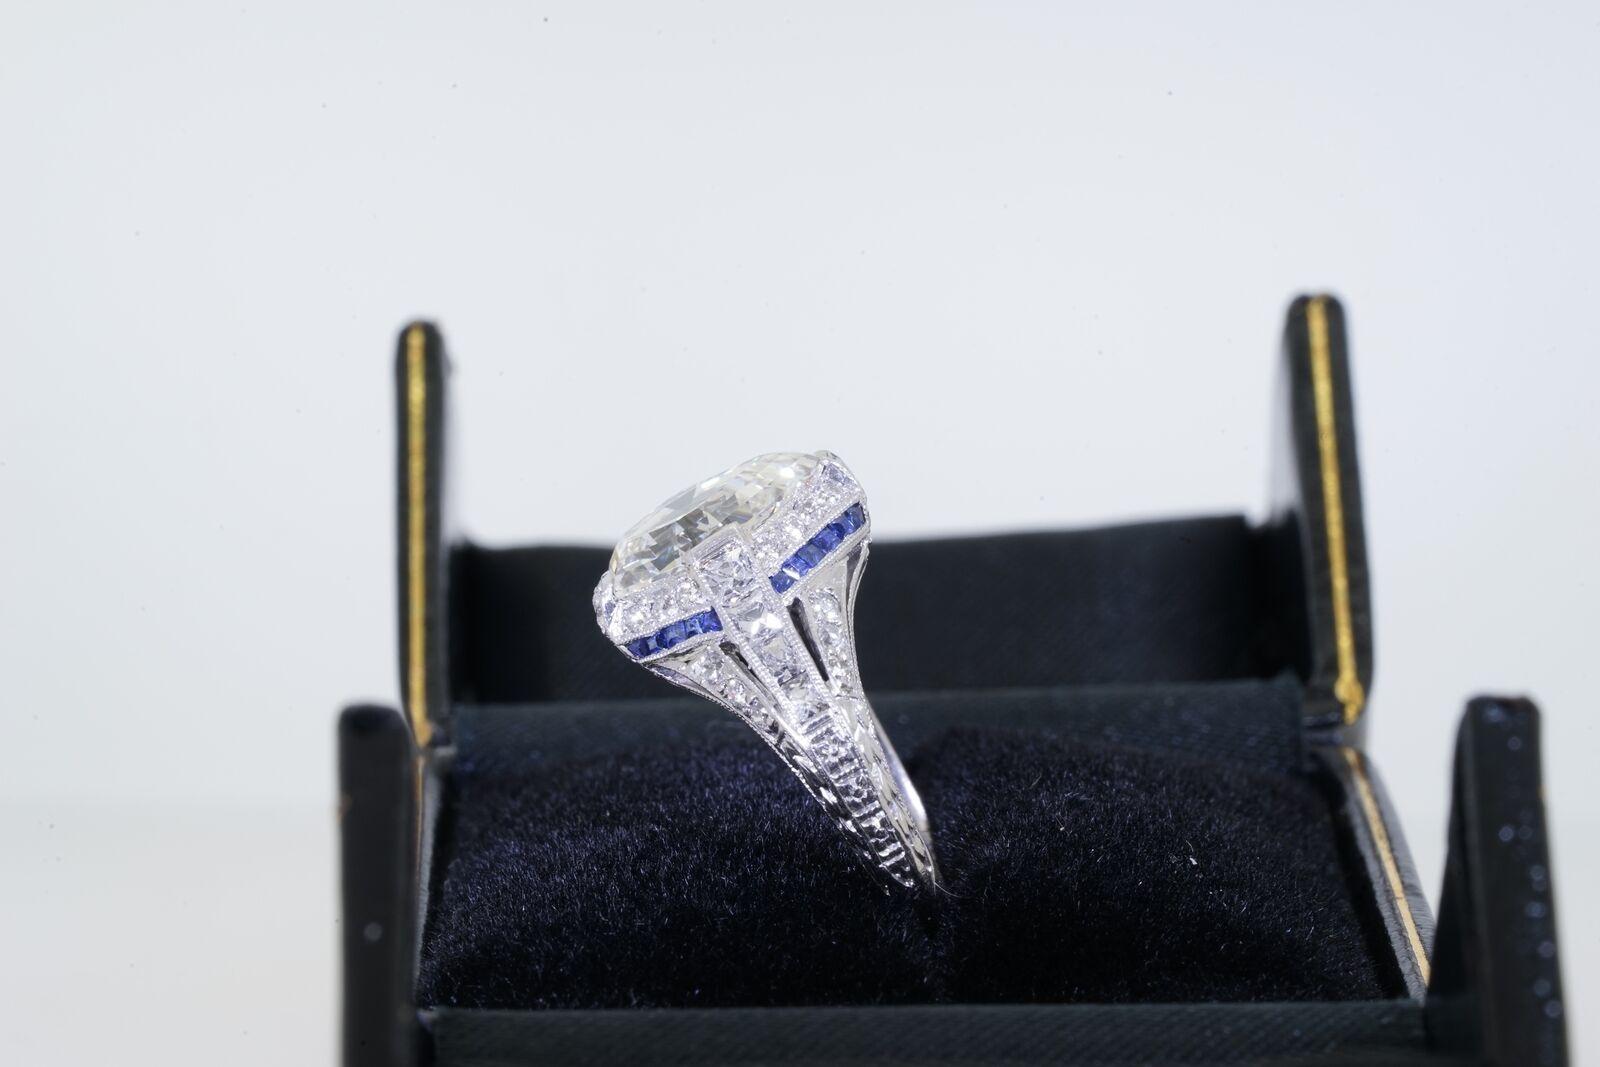 Details & Condition: Art Deco engagement rings recall an era of glamour and sophistication: elegant and timeless, this ring checks all those boxes.
Purchased in New York in 1925 this magnificent diamond engagement ring is believed to be from Dreicer